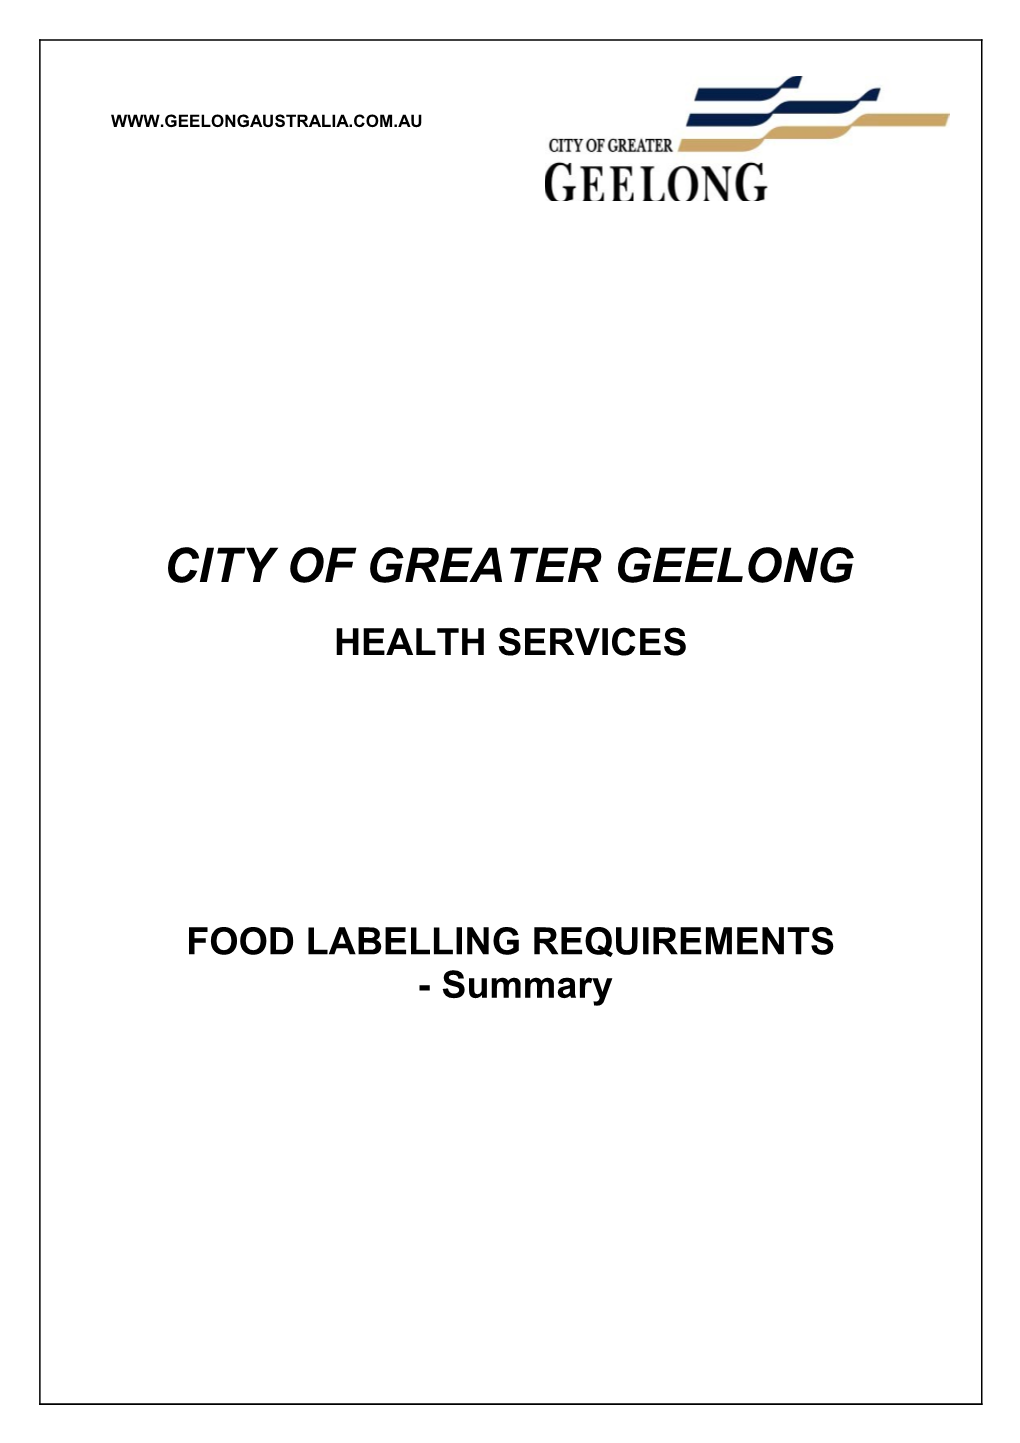 City of Greater Geelong s5